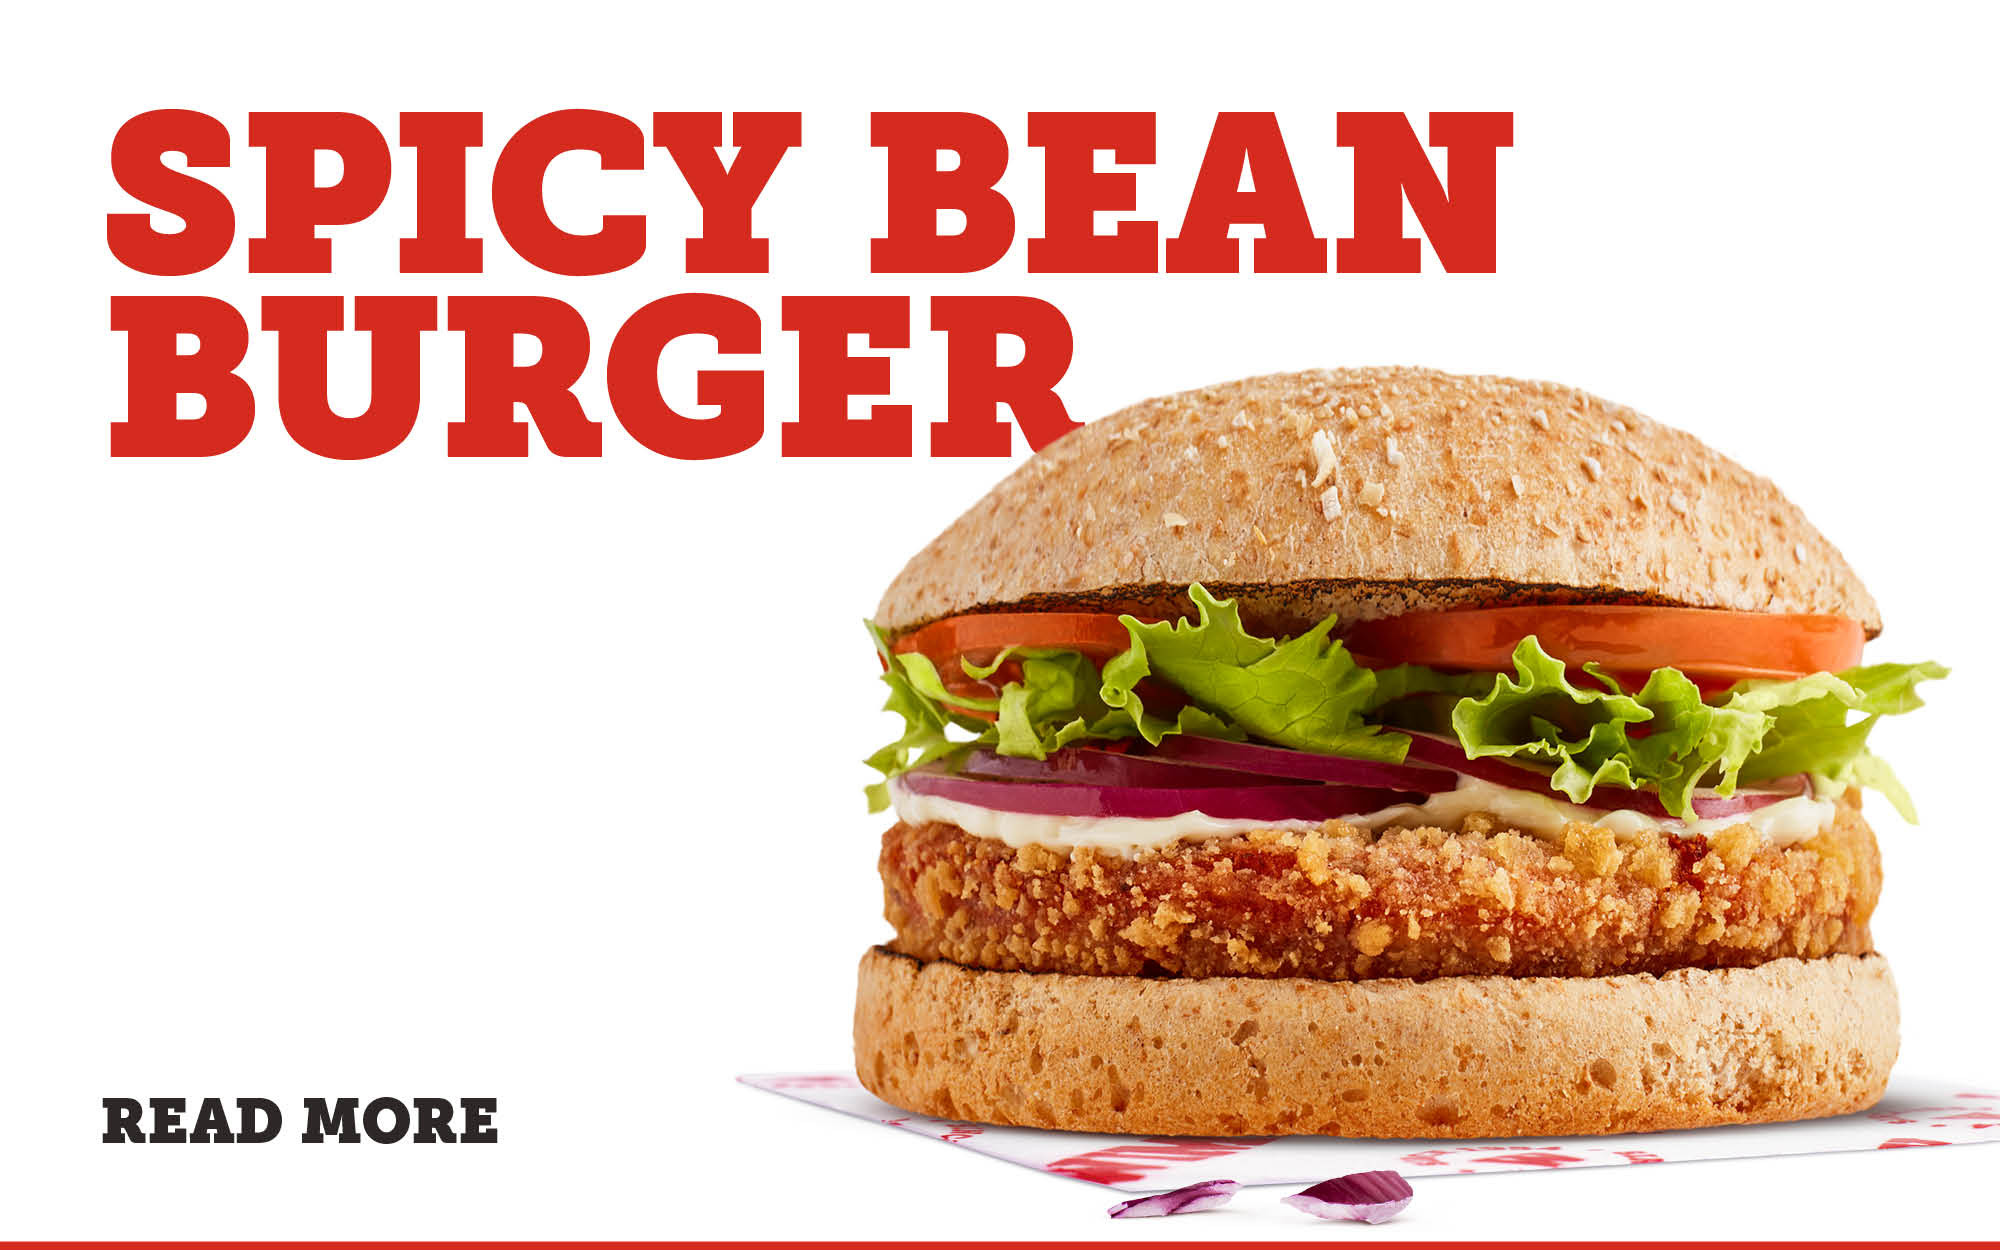 Born in the 80s… the Bean Burger is an icon! image